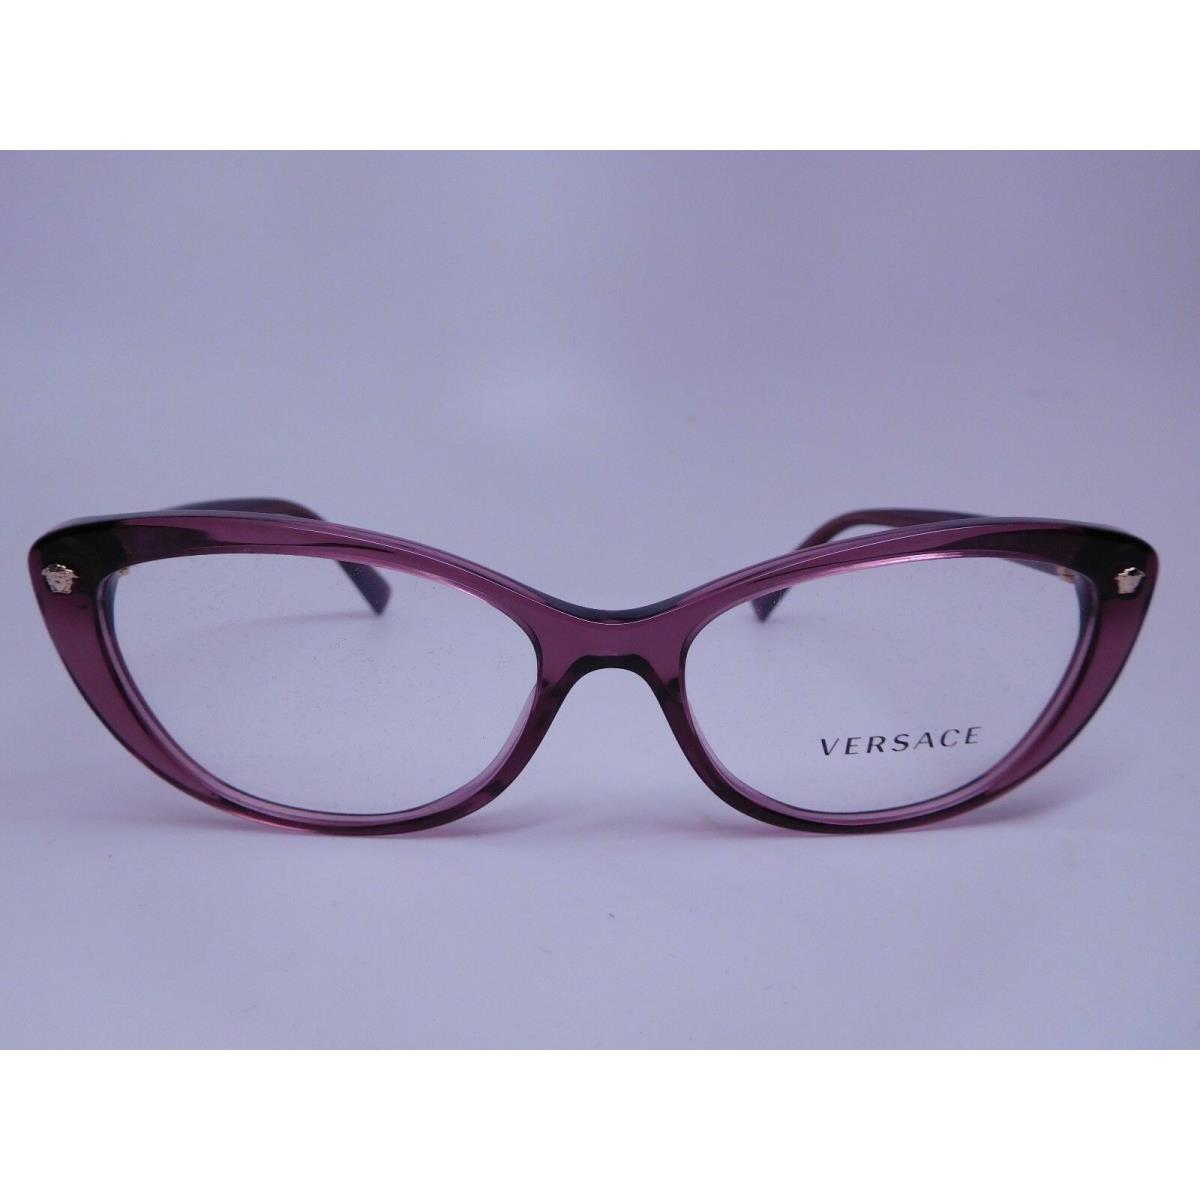 Versace Mod.3258 Eyeglasses Size 53-16-140 Color 5268 Women`s Made in Italy